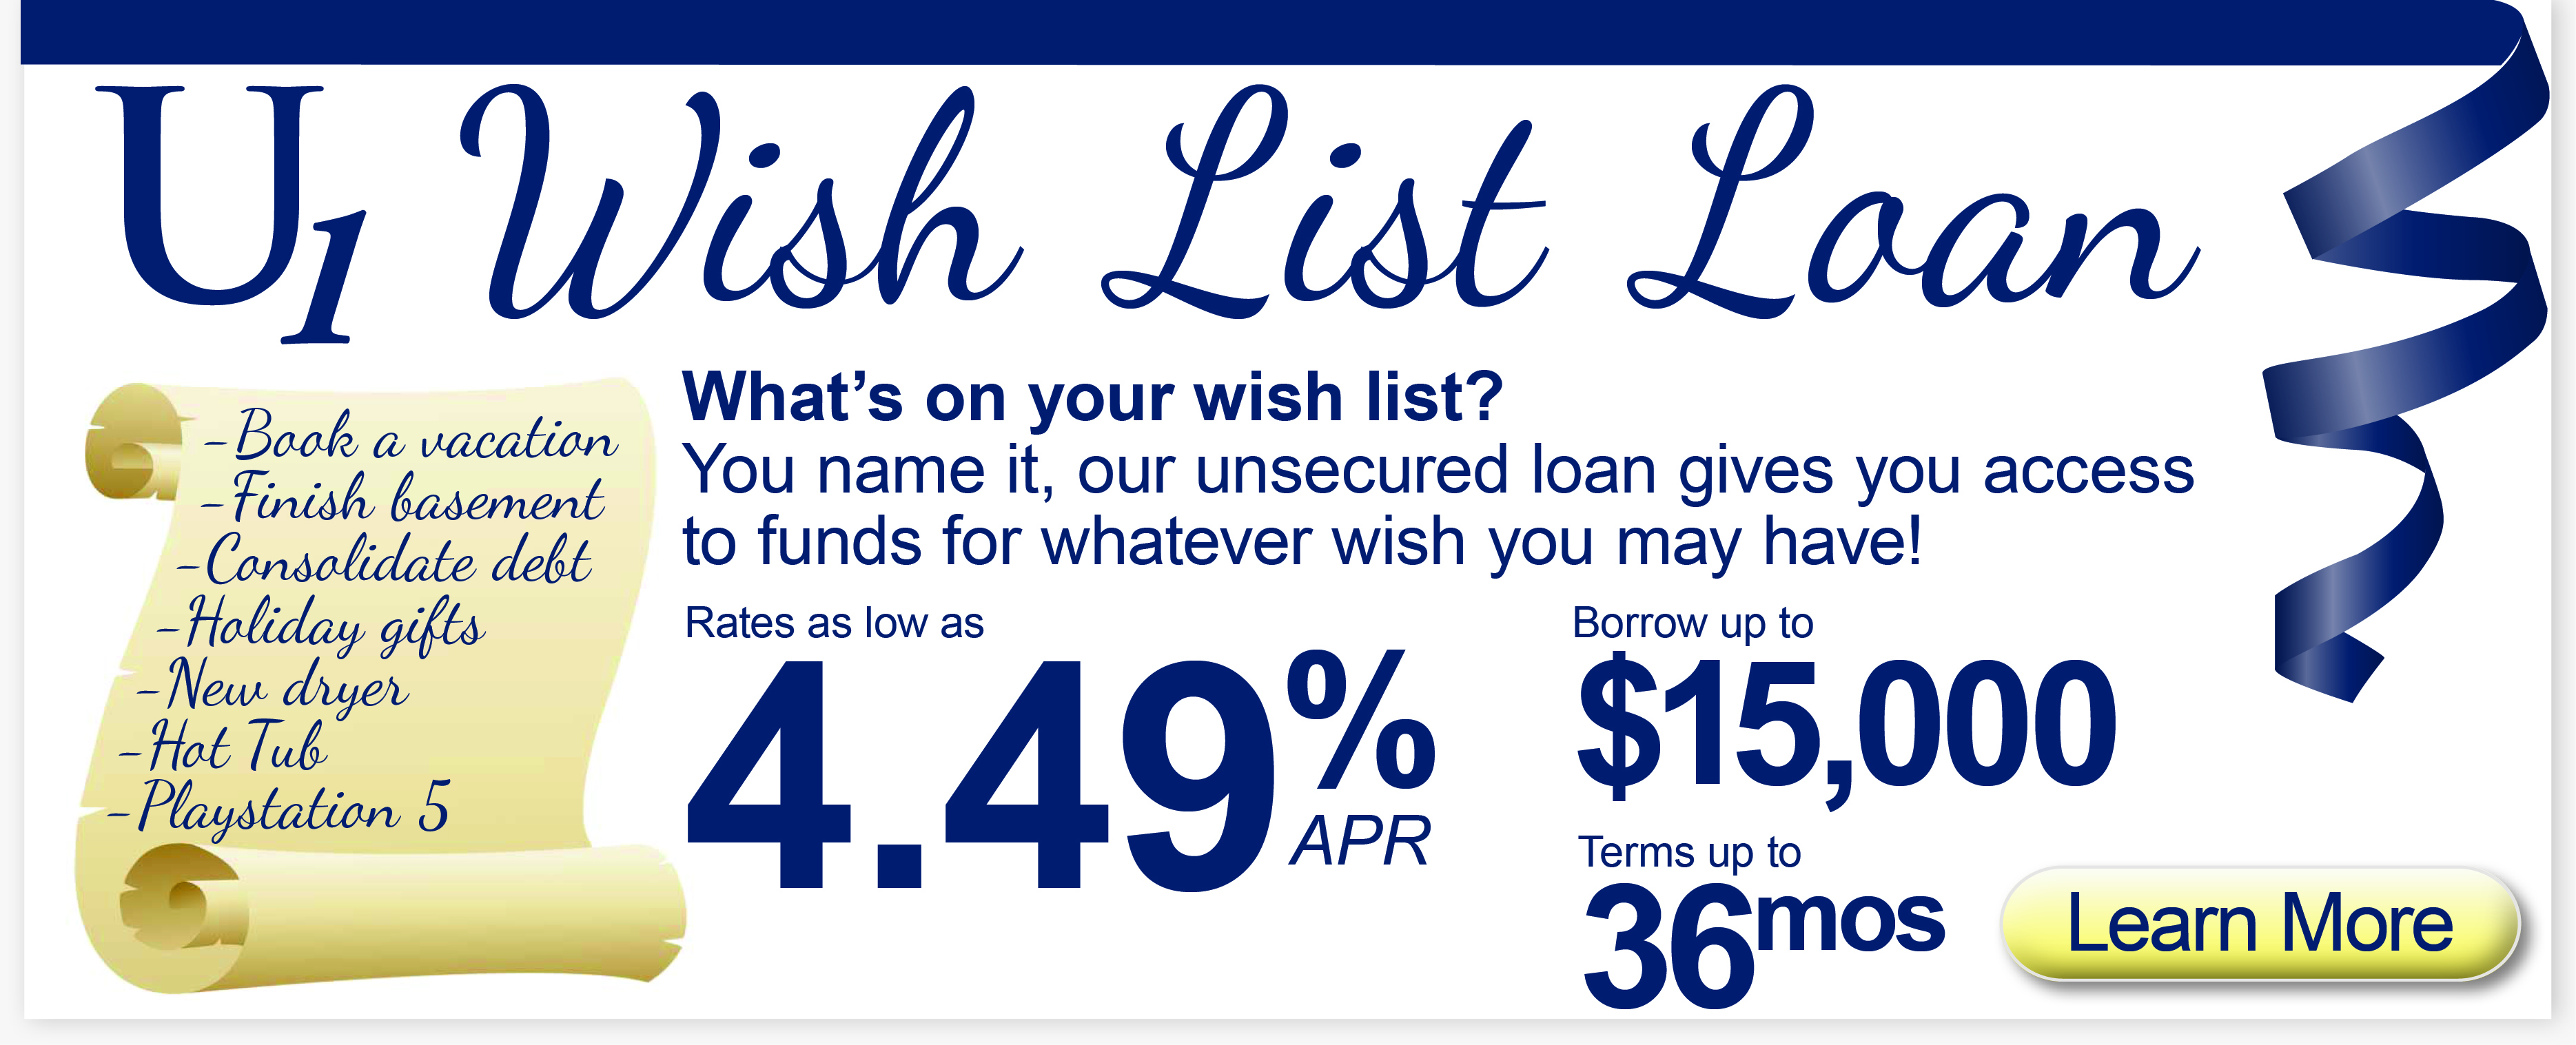 Wish List Loan Rates as Low as 4.49%